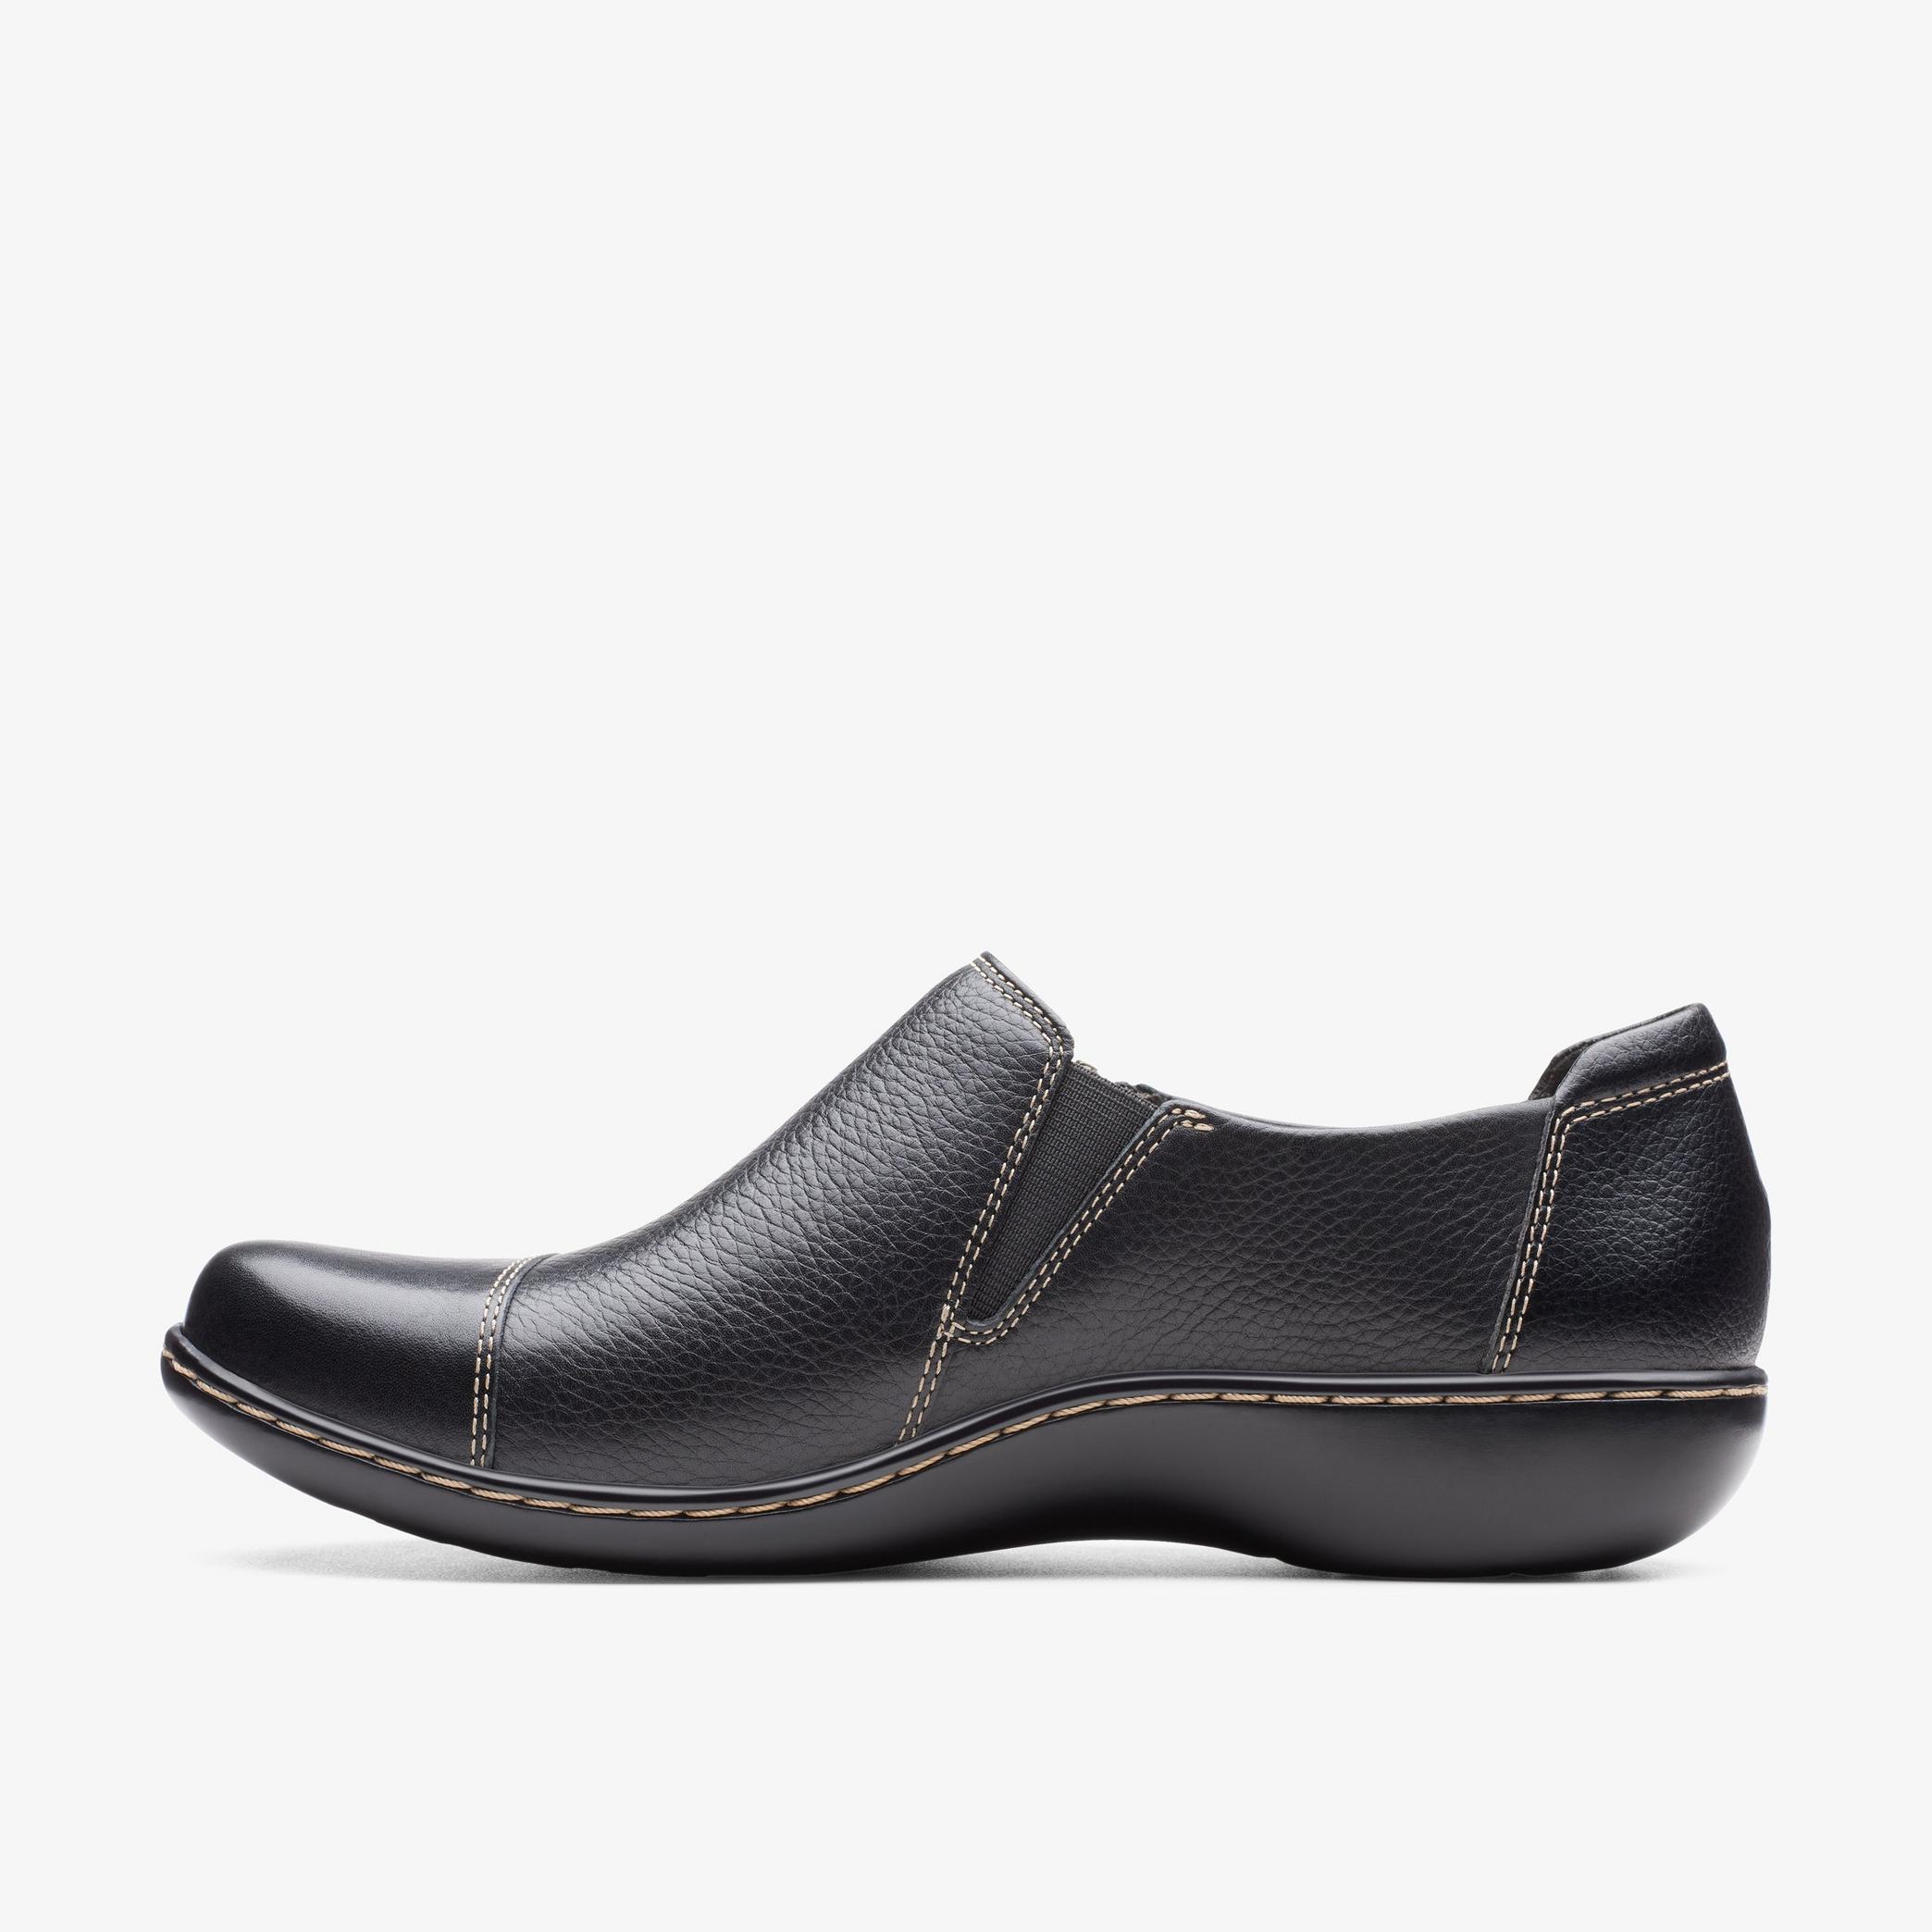 WOMENS Ashland Palm Black Leather Slip Ons | Clarks Outlet